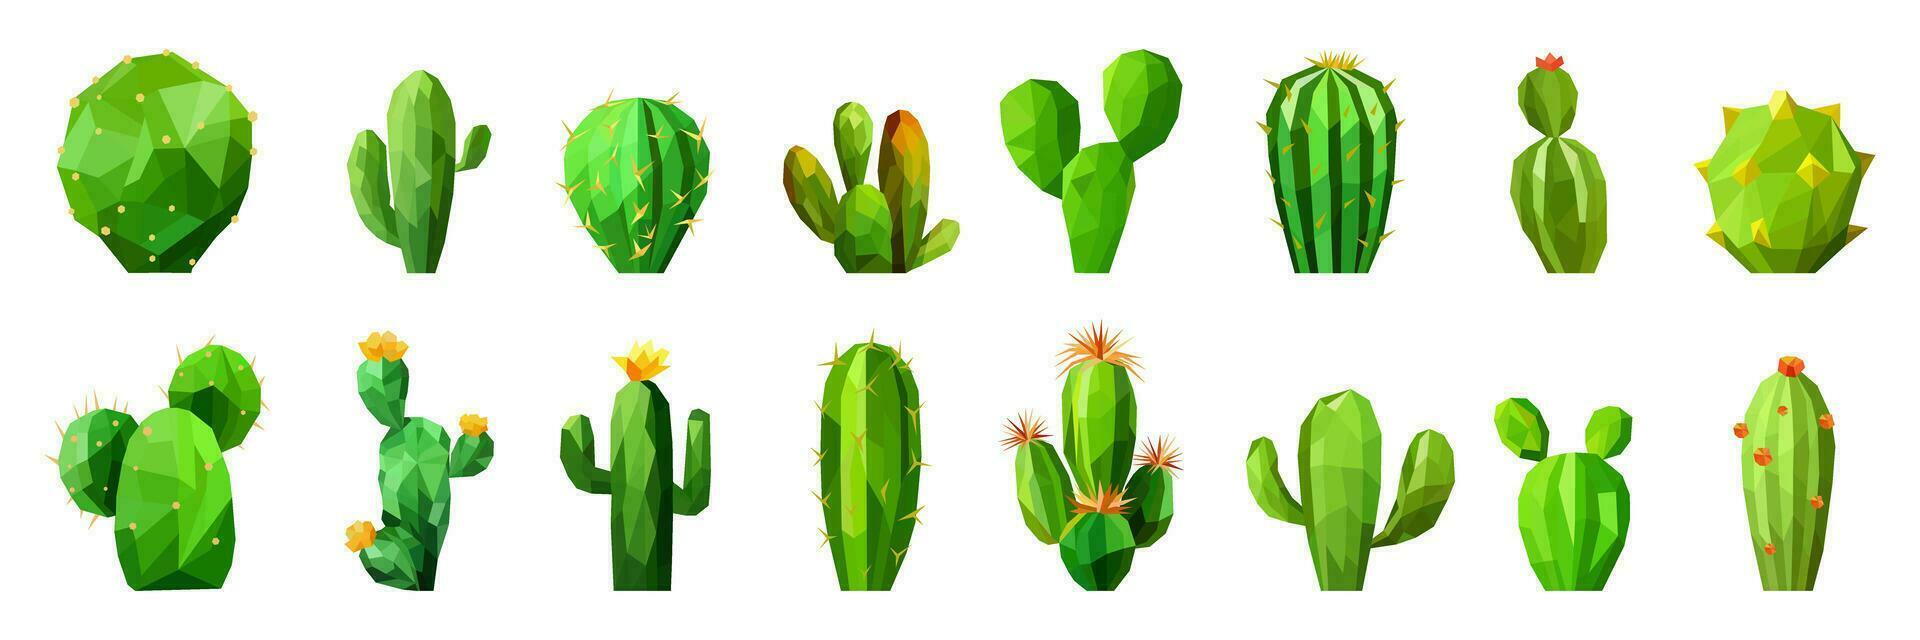 Set of a polygonal green cactus. Minimalist low poly art style collection. vector